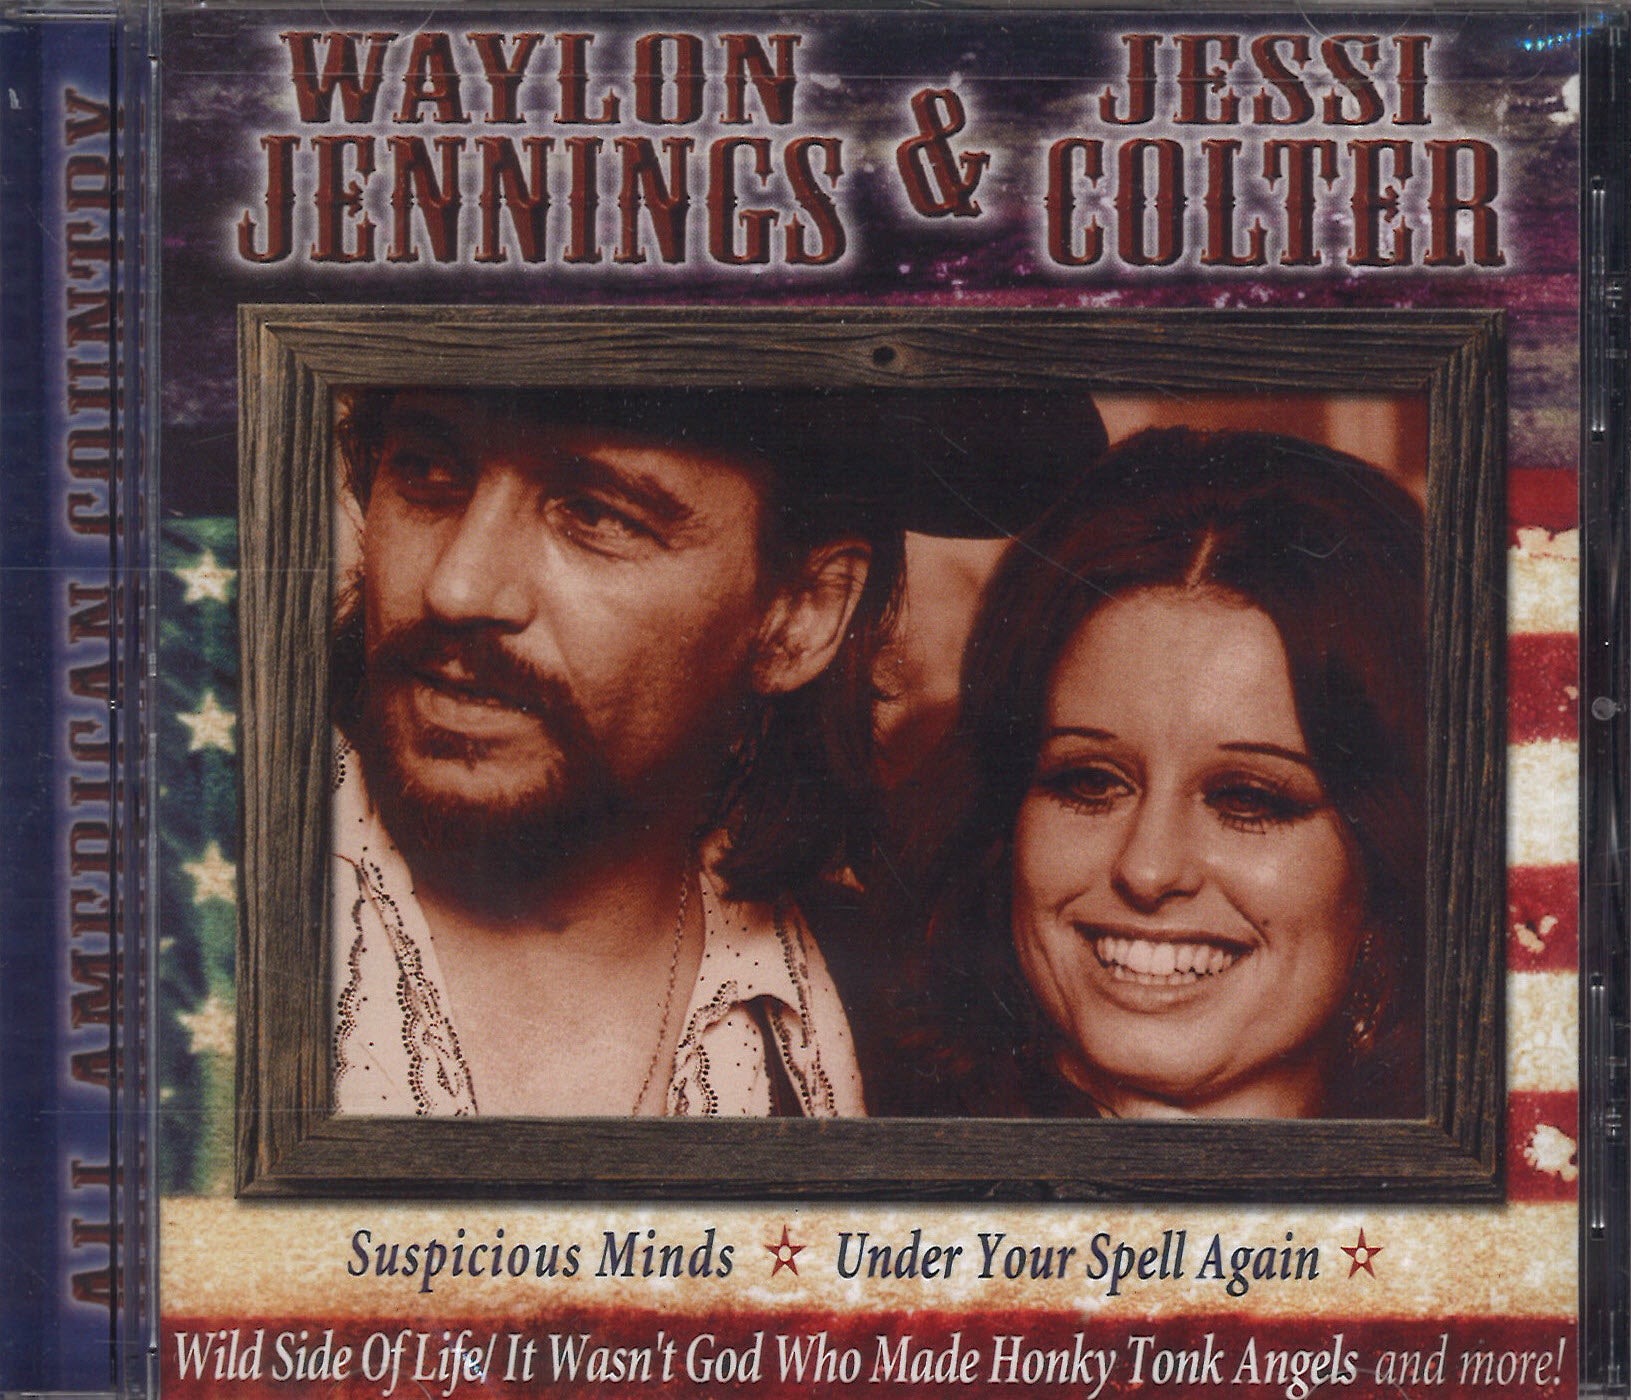 Waylon Jennings & Jessie Coulter All American Country